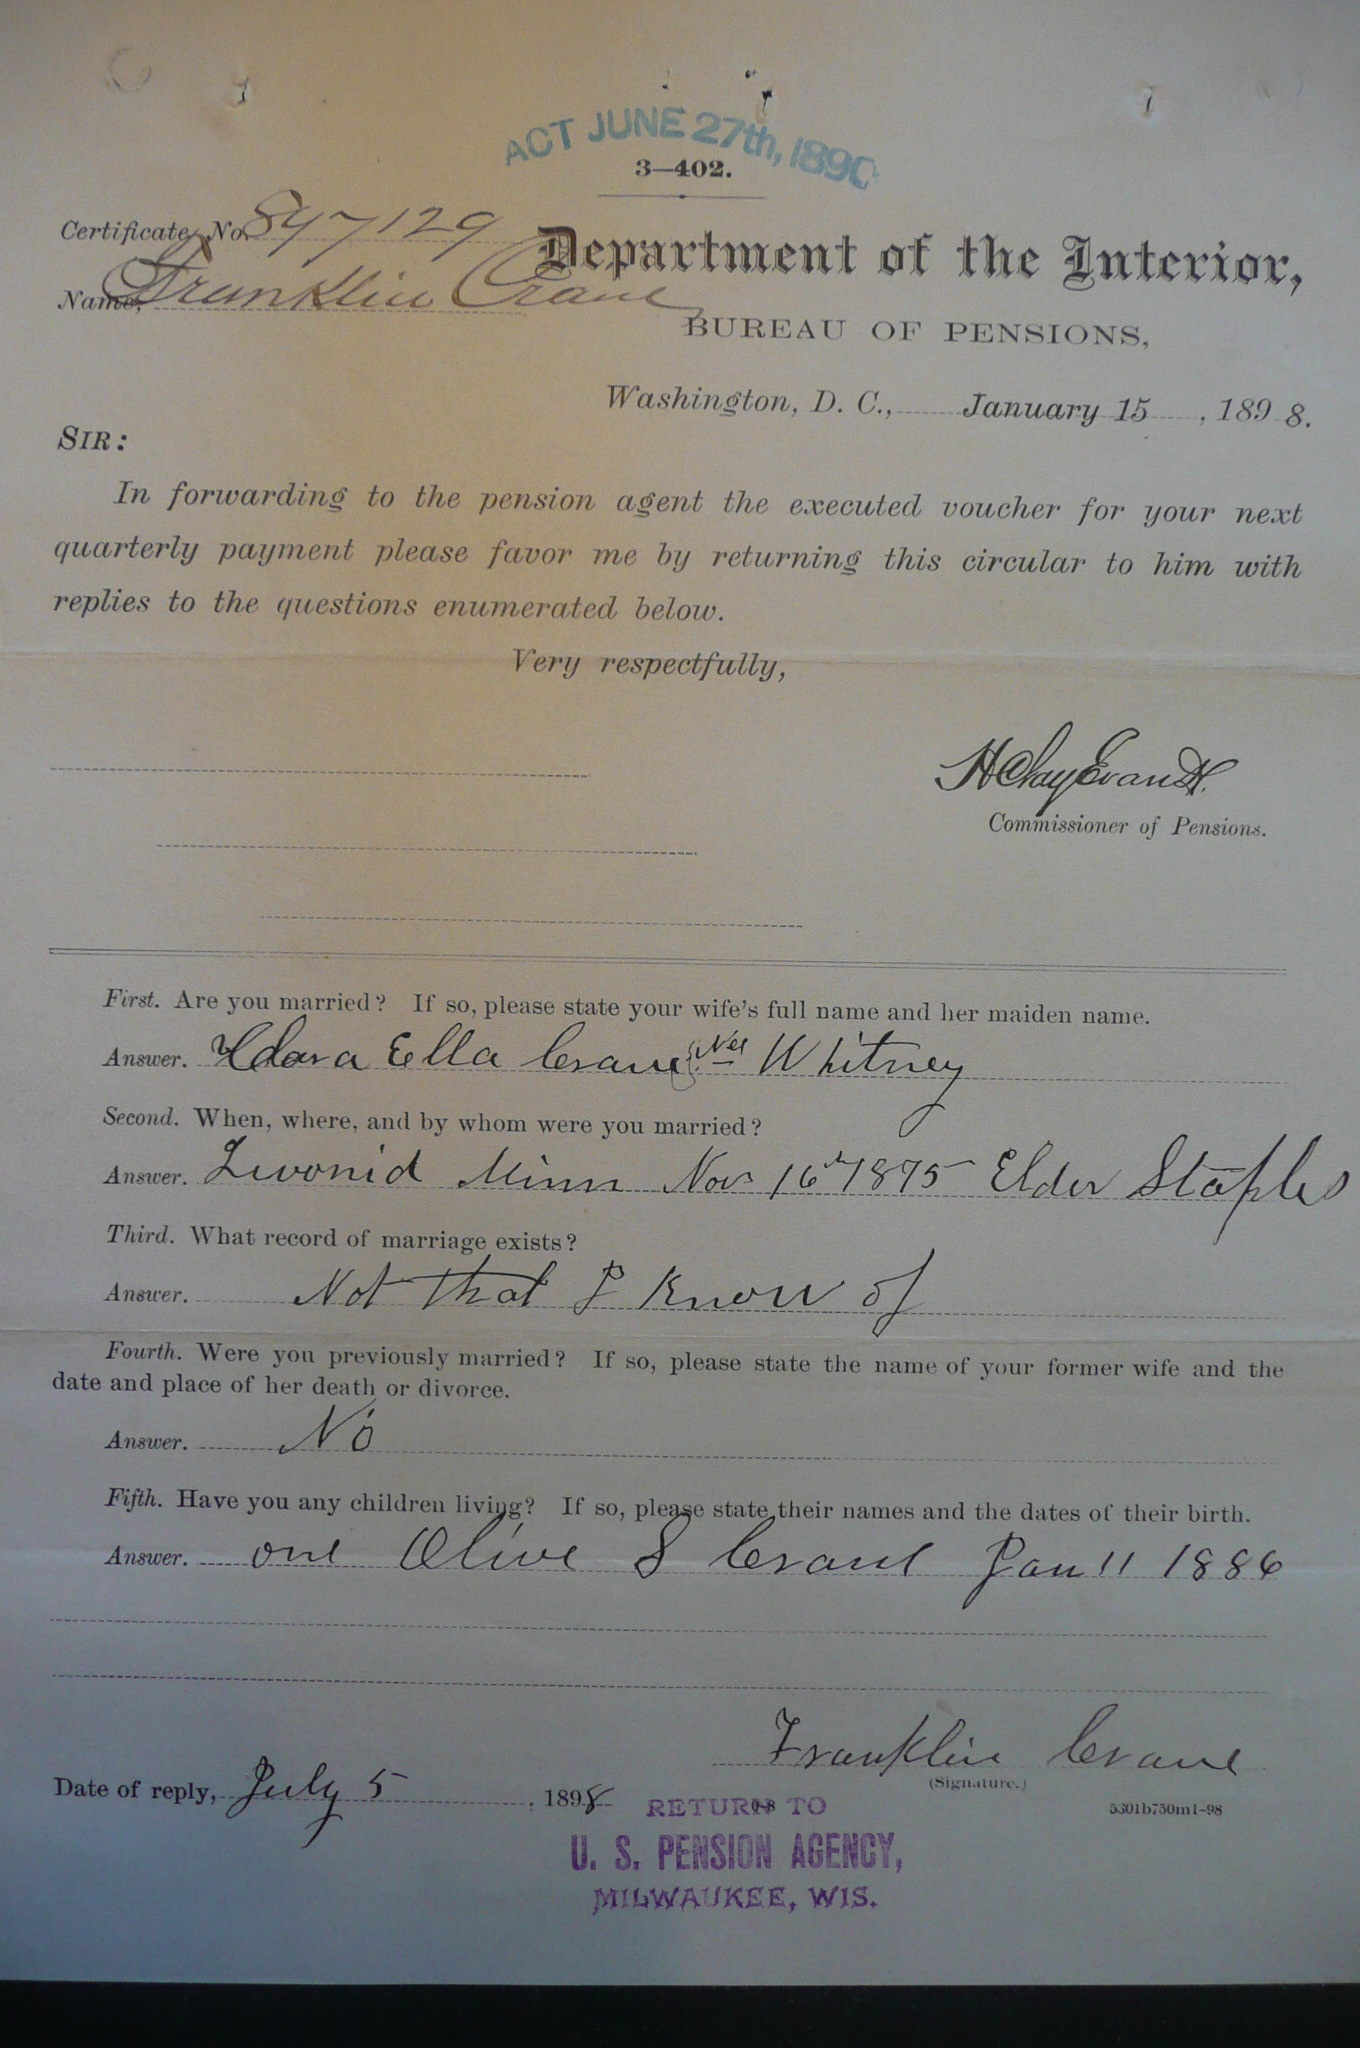 Reply to Inquiry, 1898